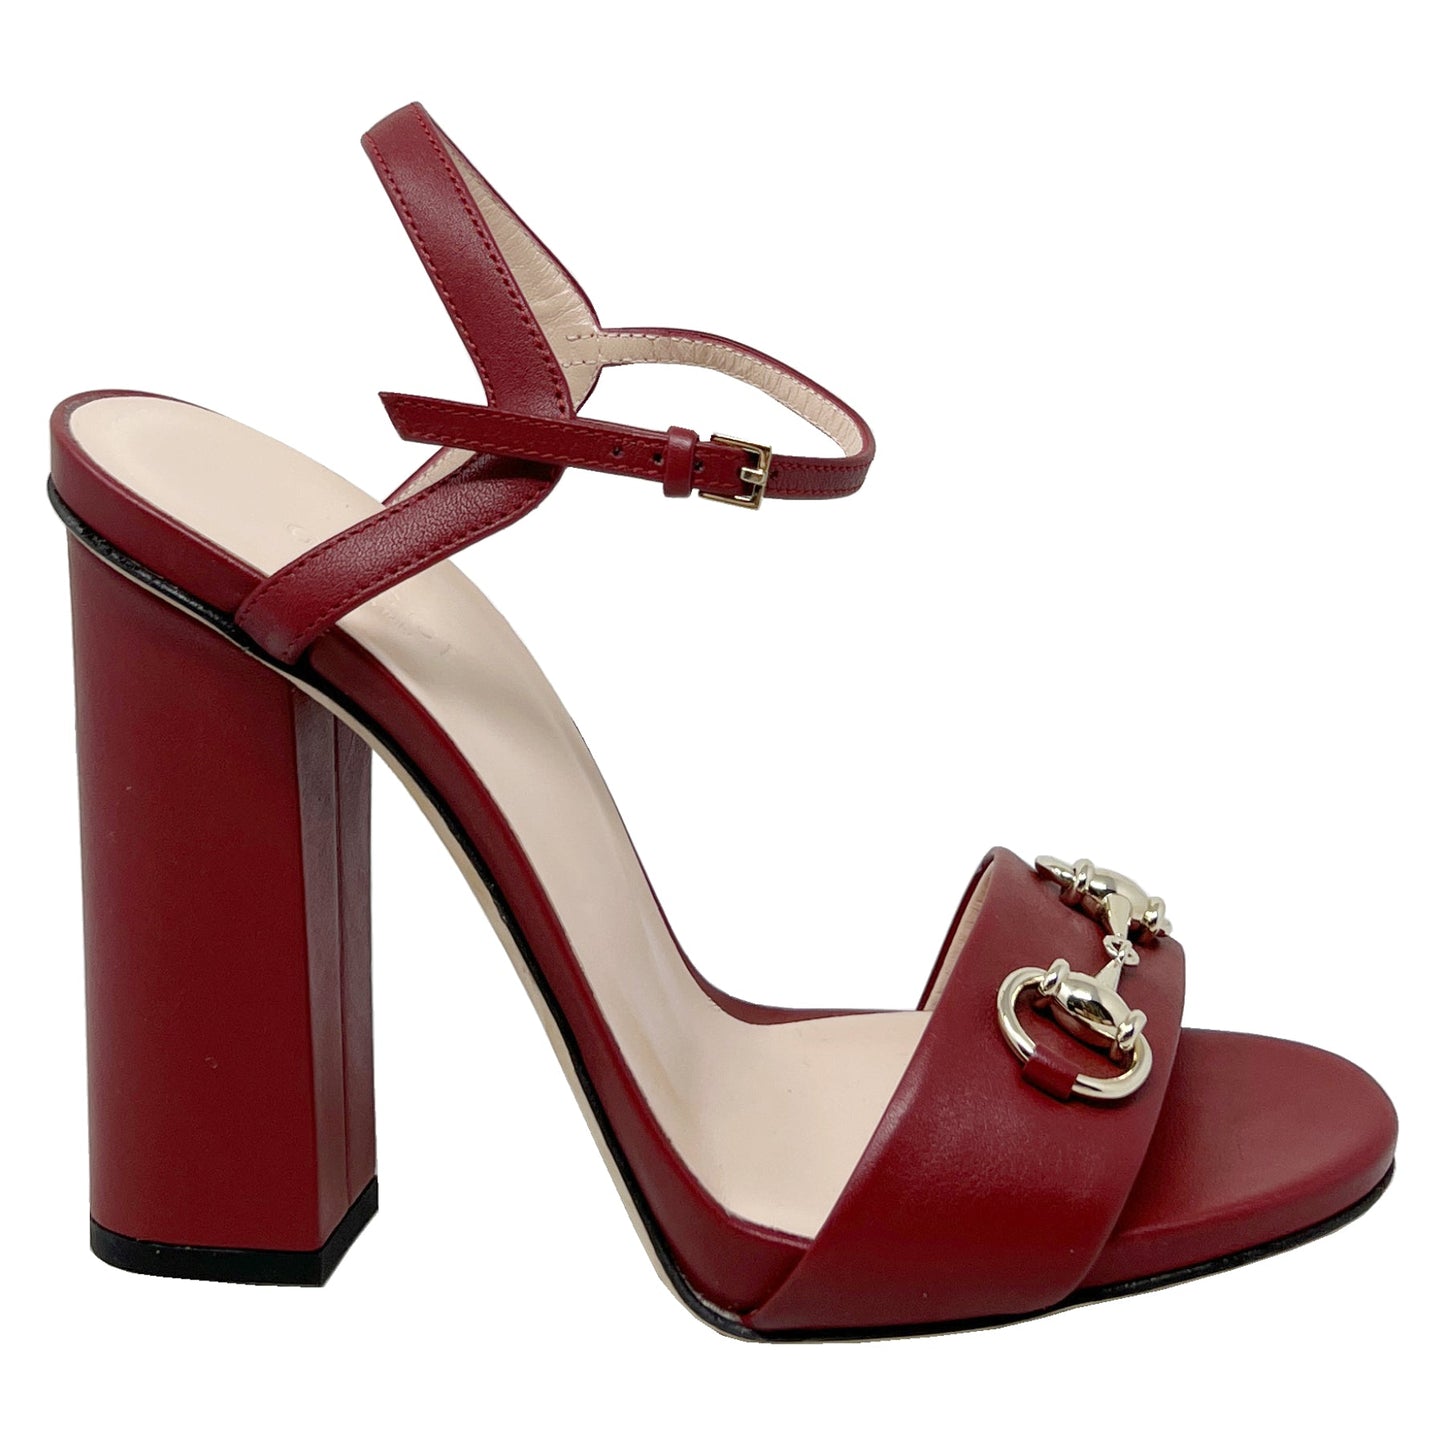 Gucci Red Leather Horsebit Ankle Strap Open Toe Block High Heel Sandals Size EU 37.5